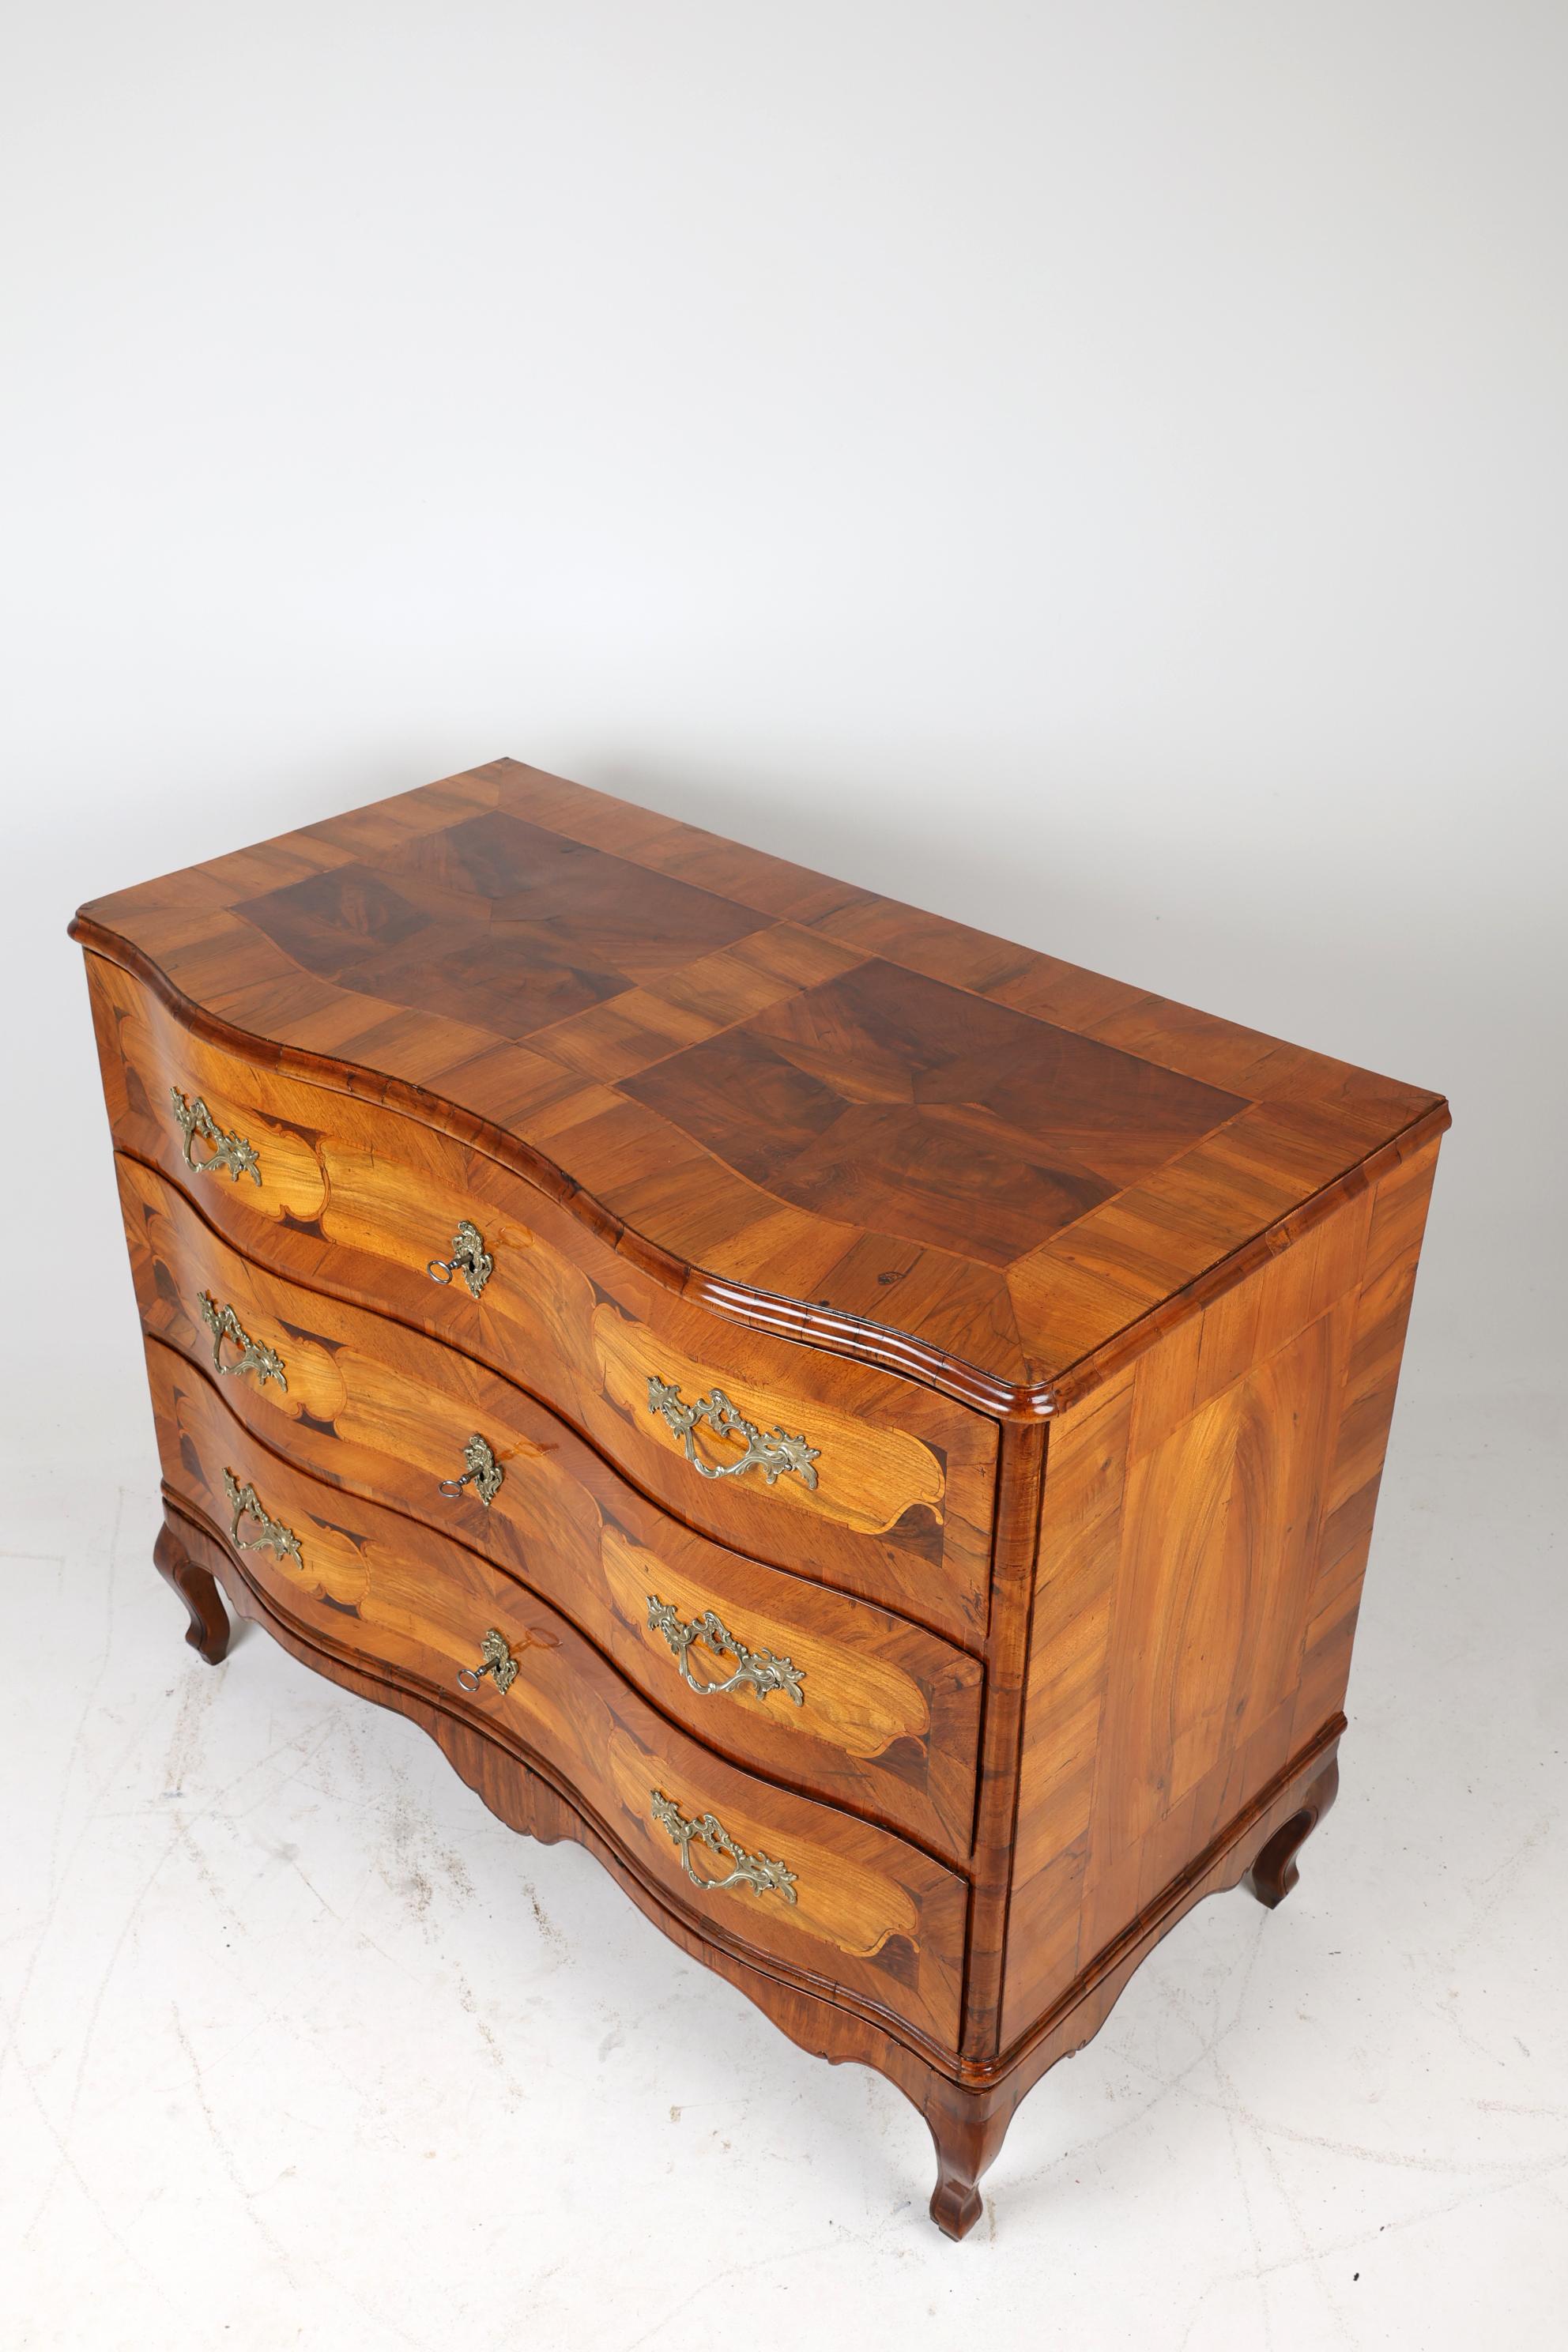 Late 18th Century Baroque Commode with Burl Walnut For Sale 1